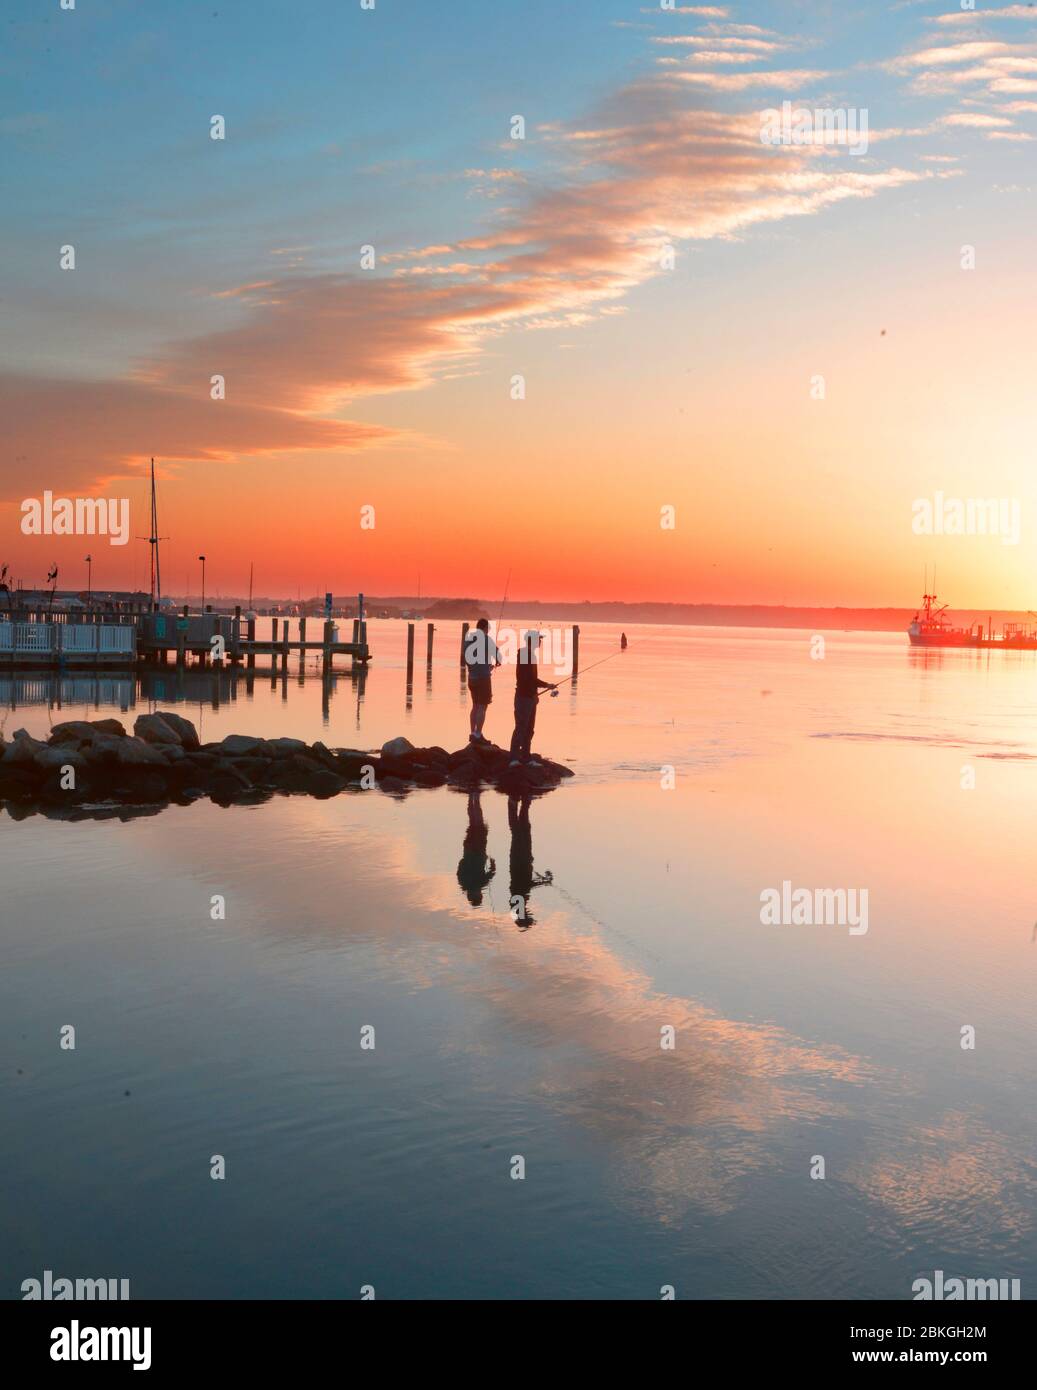 Two young men fishng of the landing at Westport harbor as the sun sets May 3 2020 , Westport Ma USA  photo by bill belknap Stock Photo